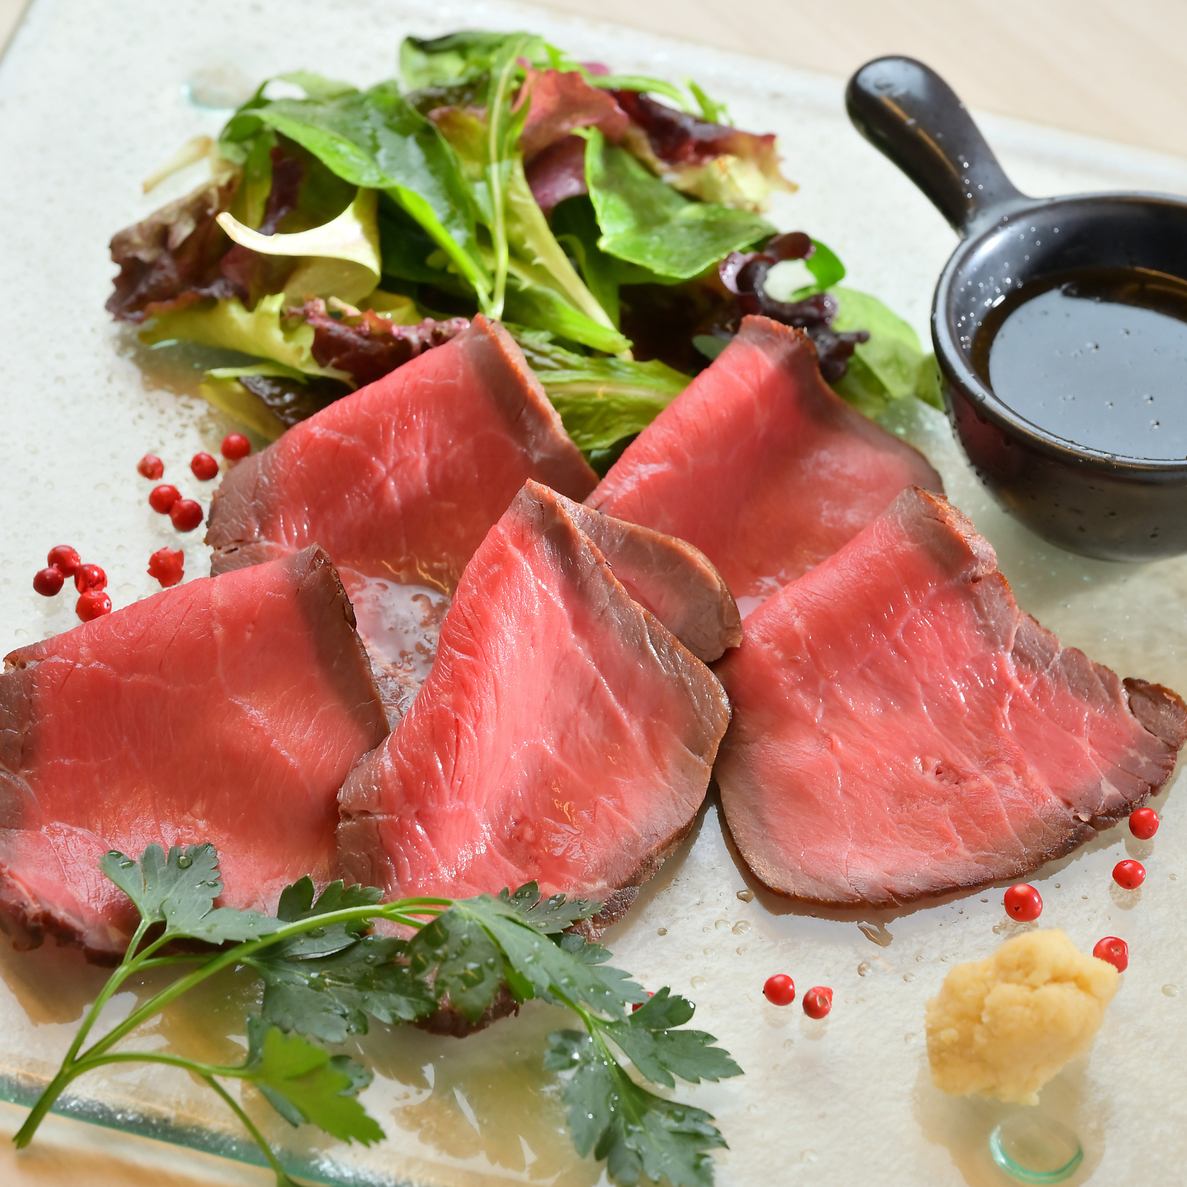 Roast beef cooked at low temperature is recommended★Please try it♪